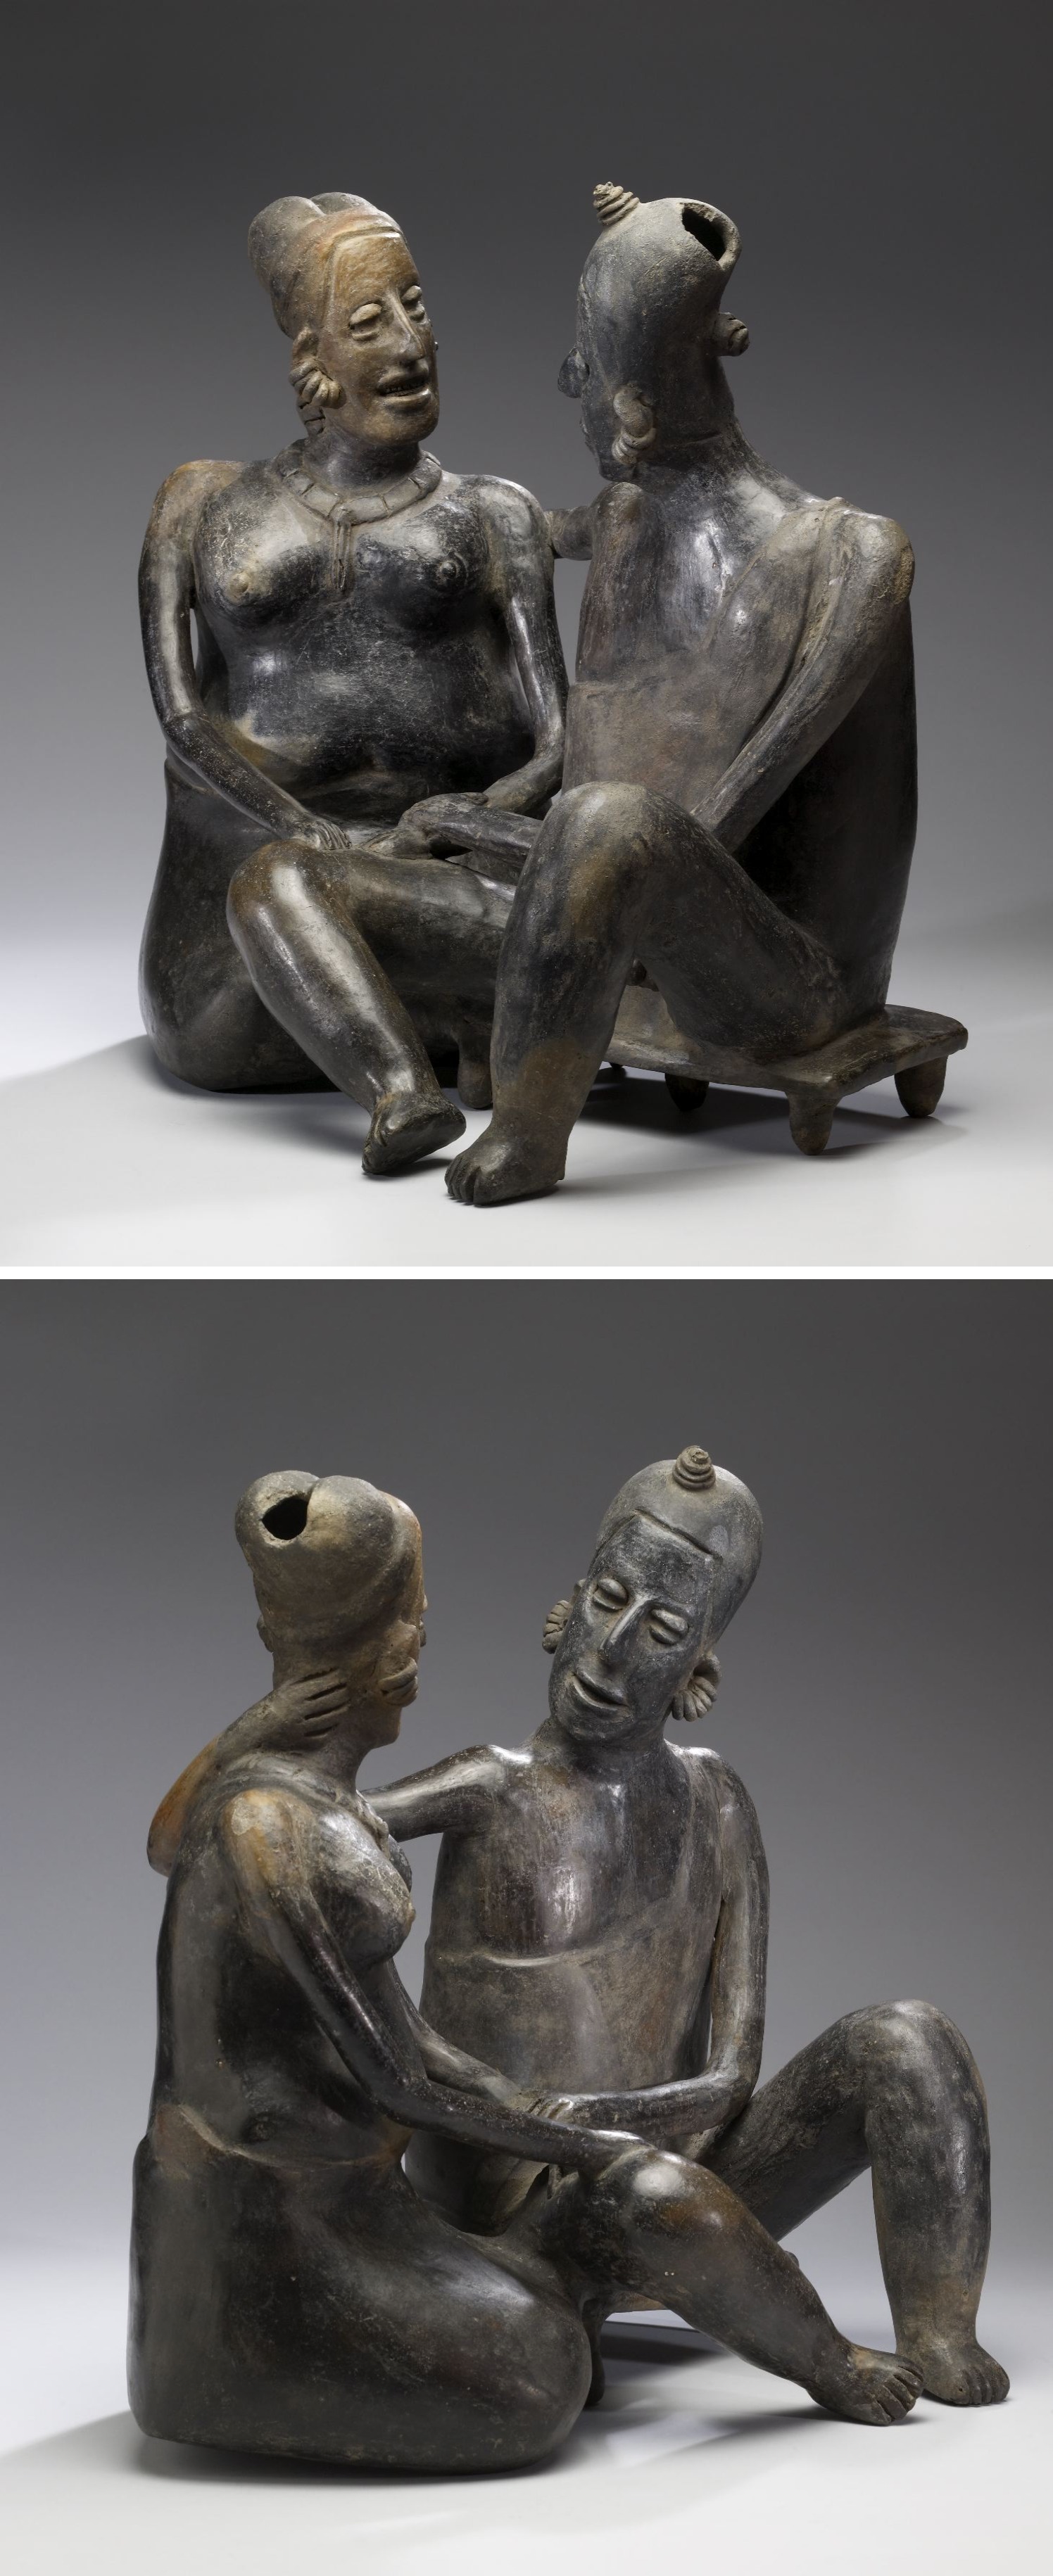 Conjoined Man and Woman (Curing Ritual Narrative), from Jalisco in Mexico. Burnished earthenware, 100 BCE-300 CE, now housed at the Walters Art Museum in Baltimore.jpg